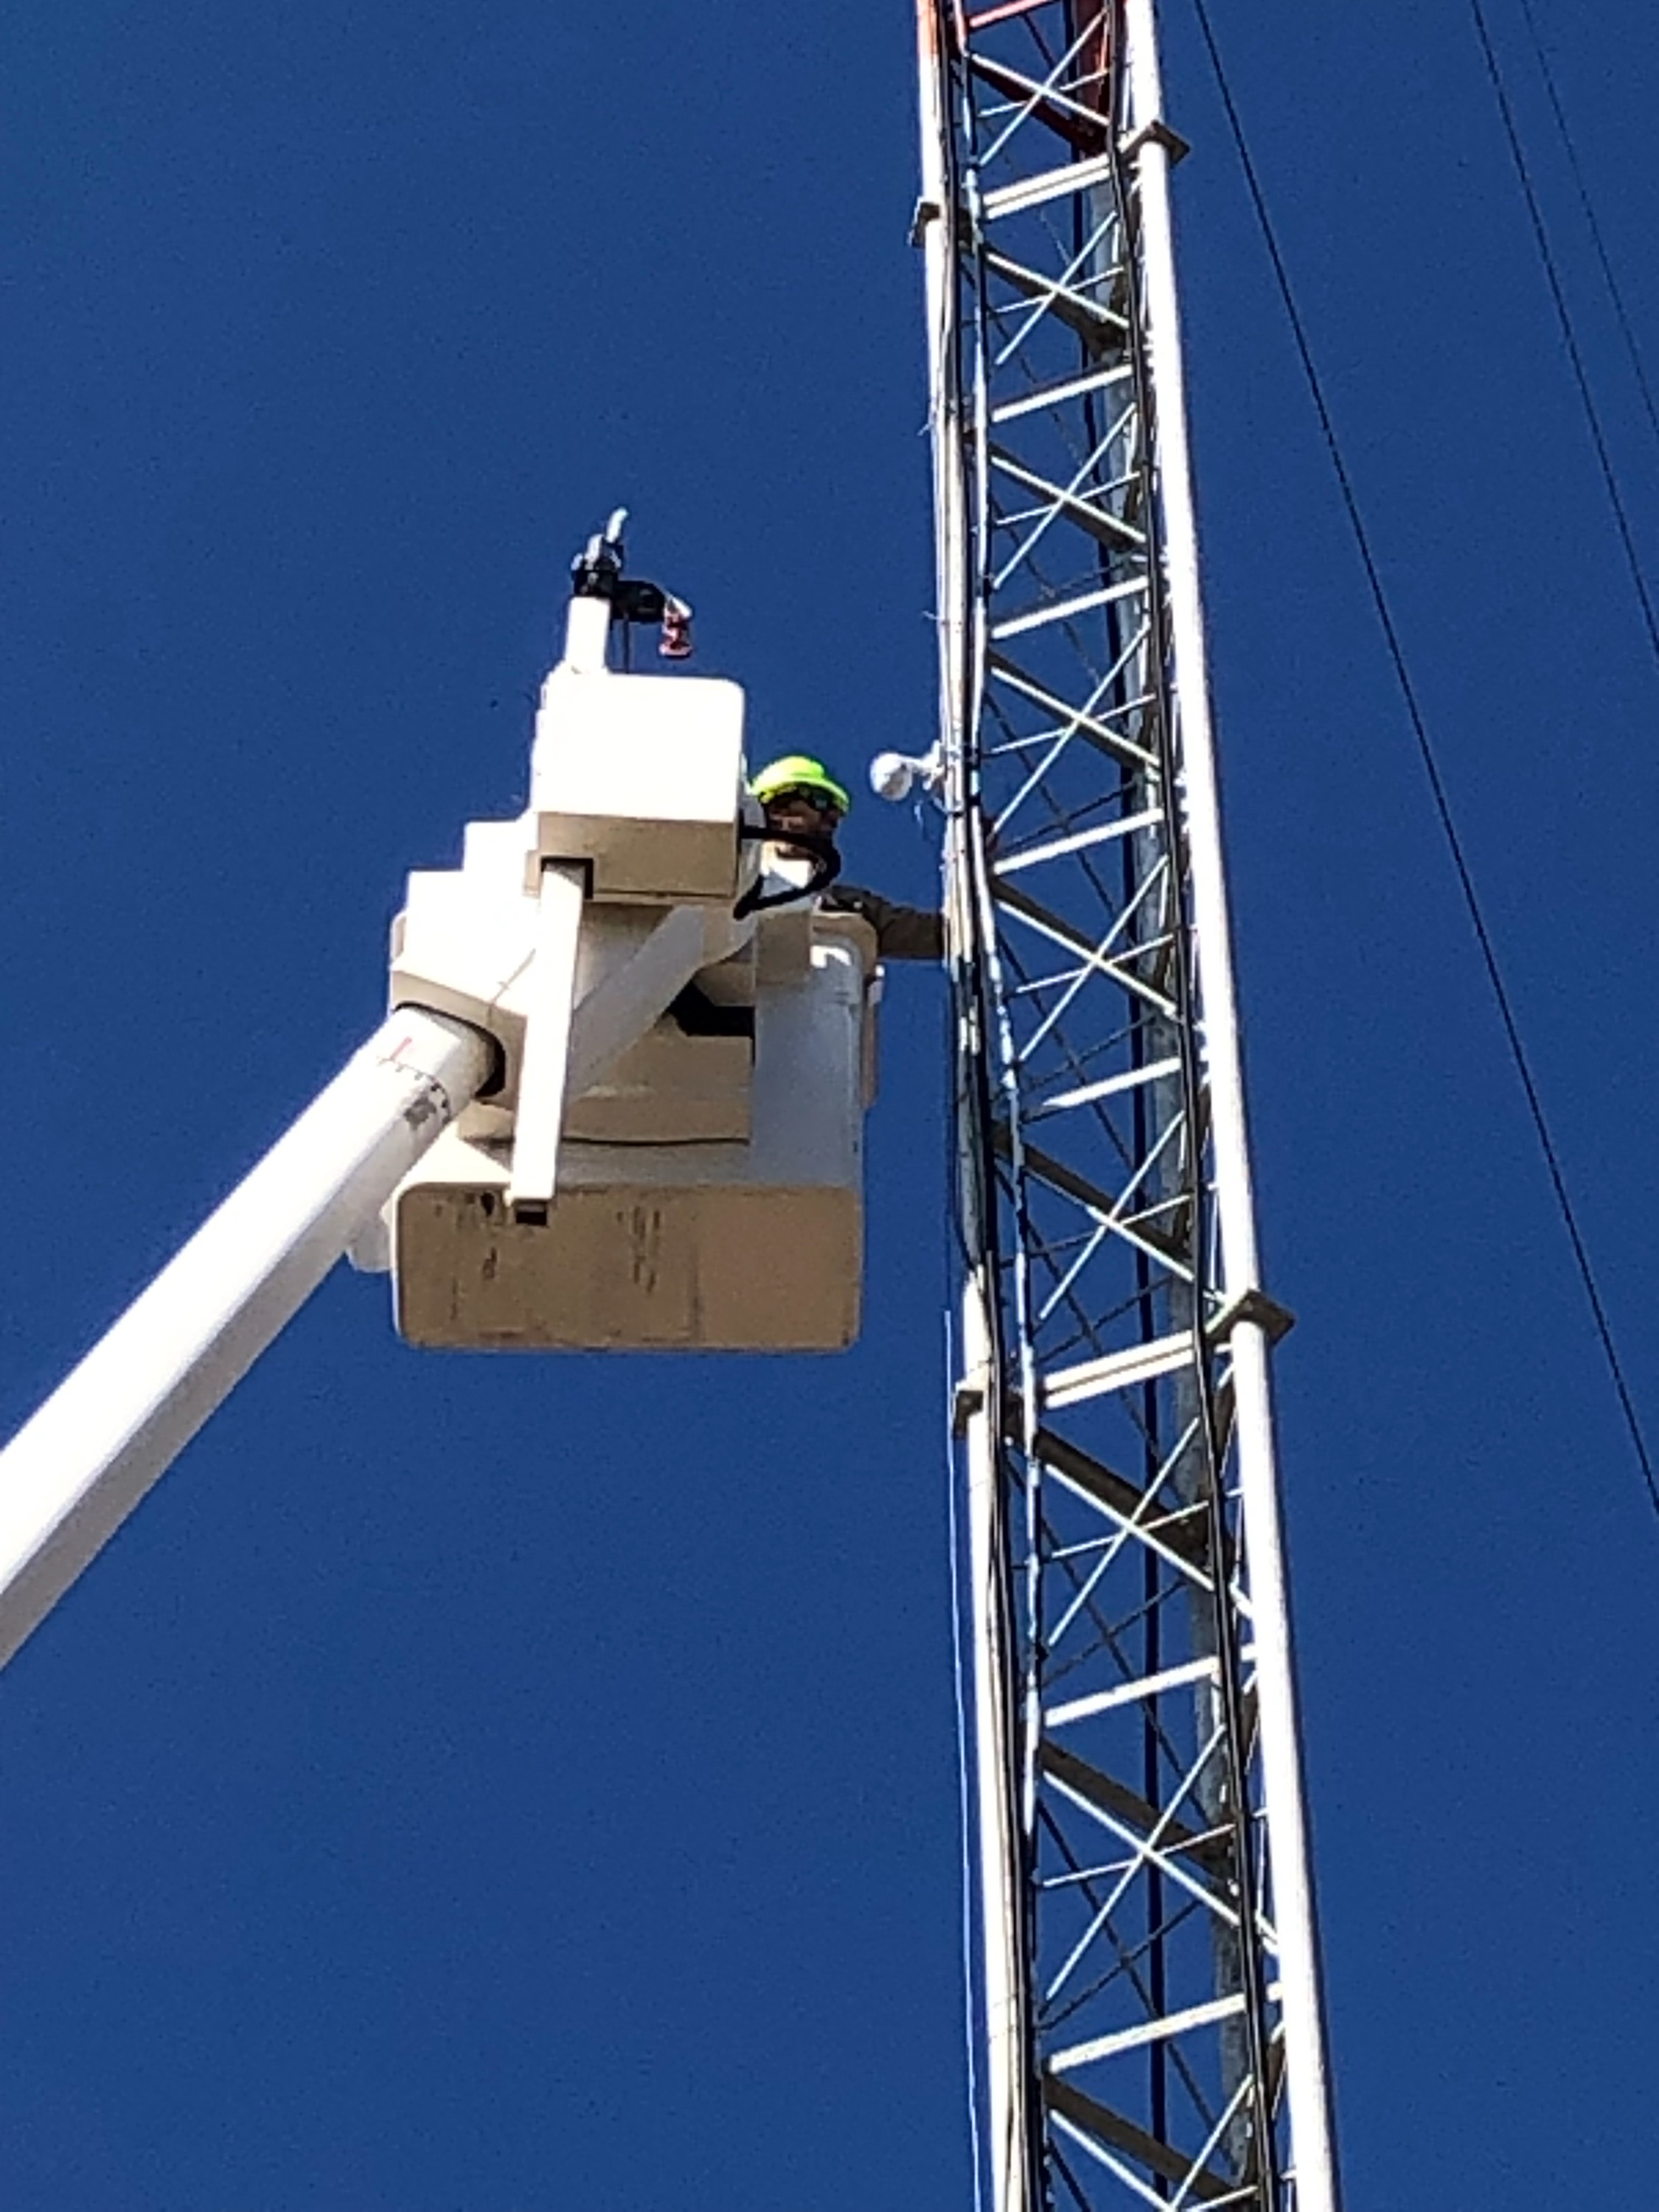 Lineman installing weather camera on tower.